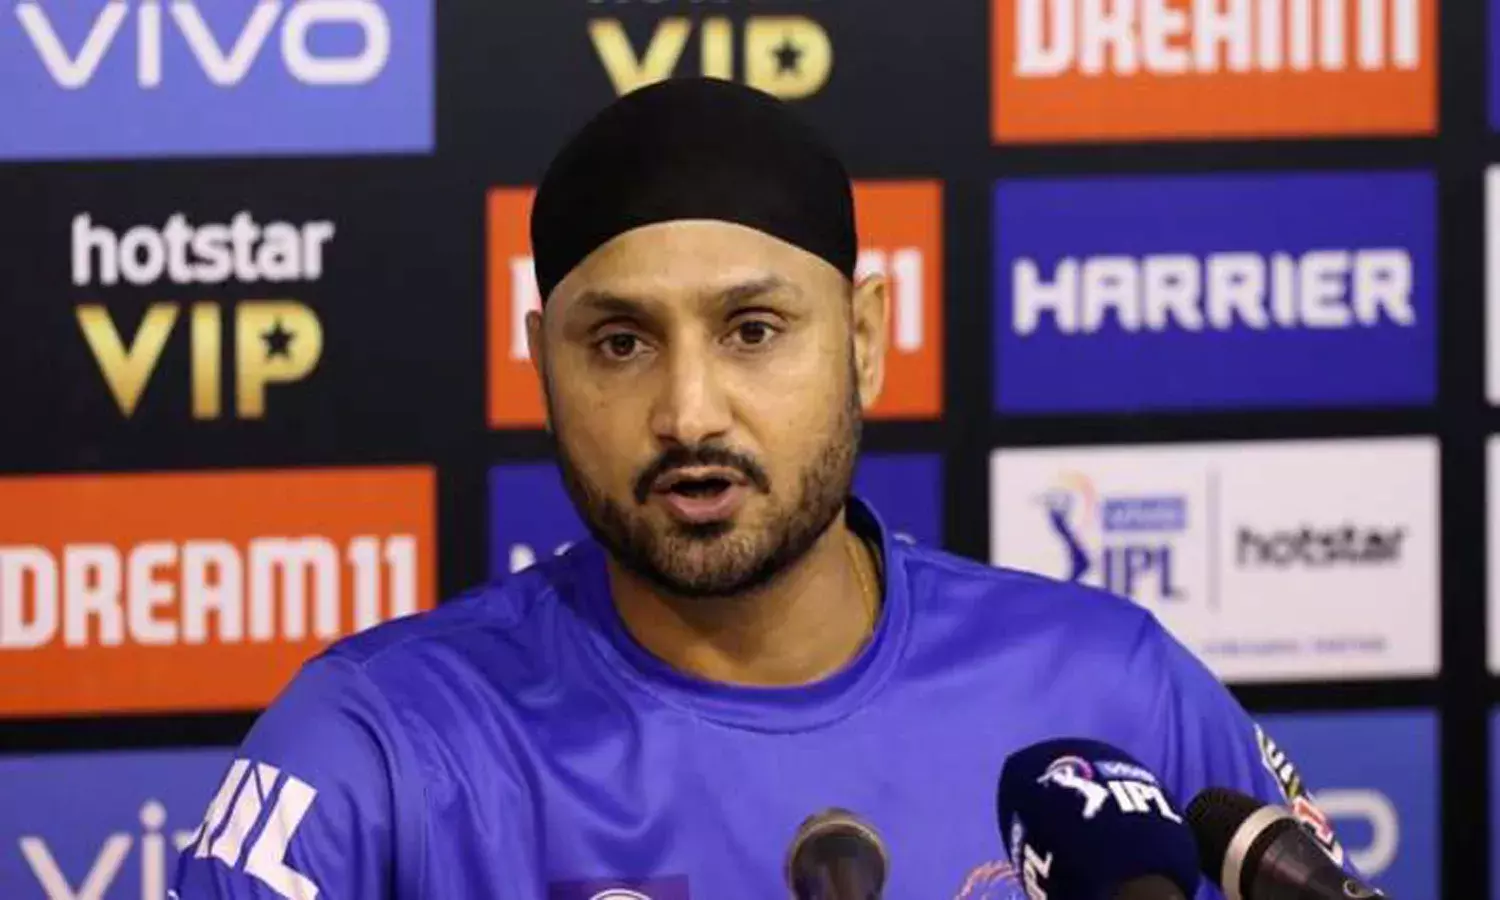 Harbhajan Singh announces retirement from all forms of cricket: All good things come to an end